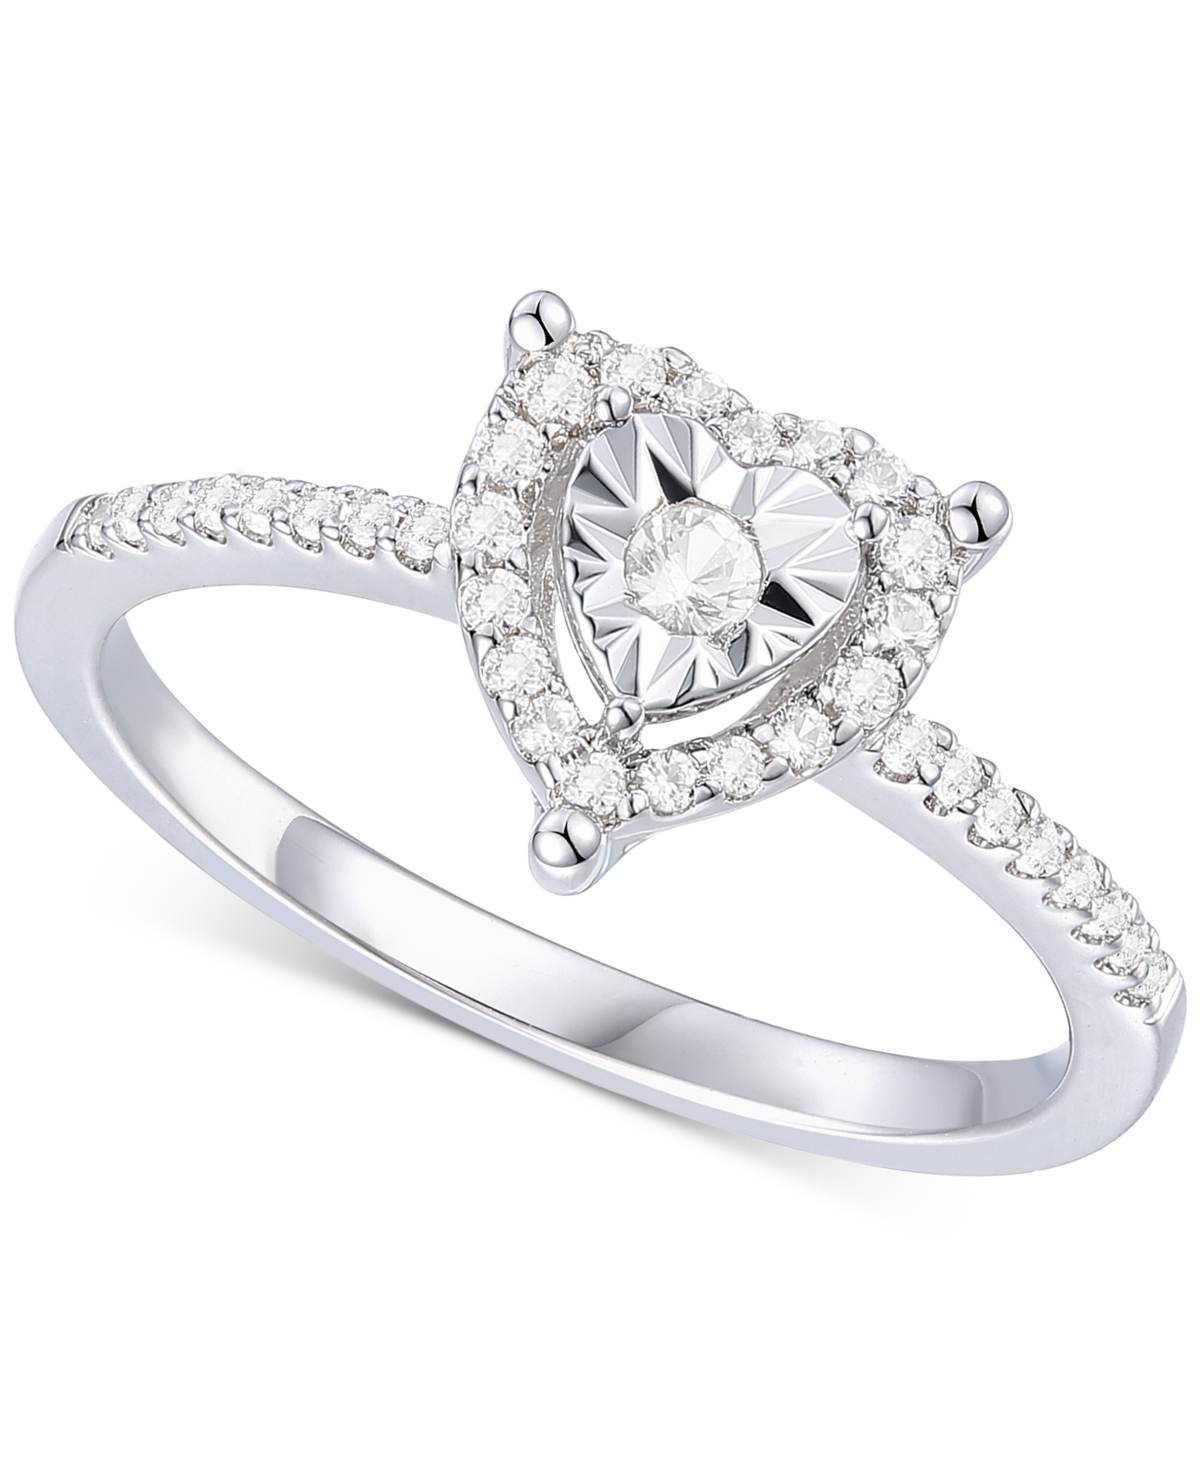 Diamond Heart Halo Ring (1/4 ct. t.w.) in Sterling Silver - Sterling Silver